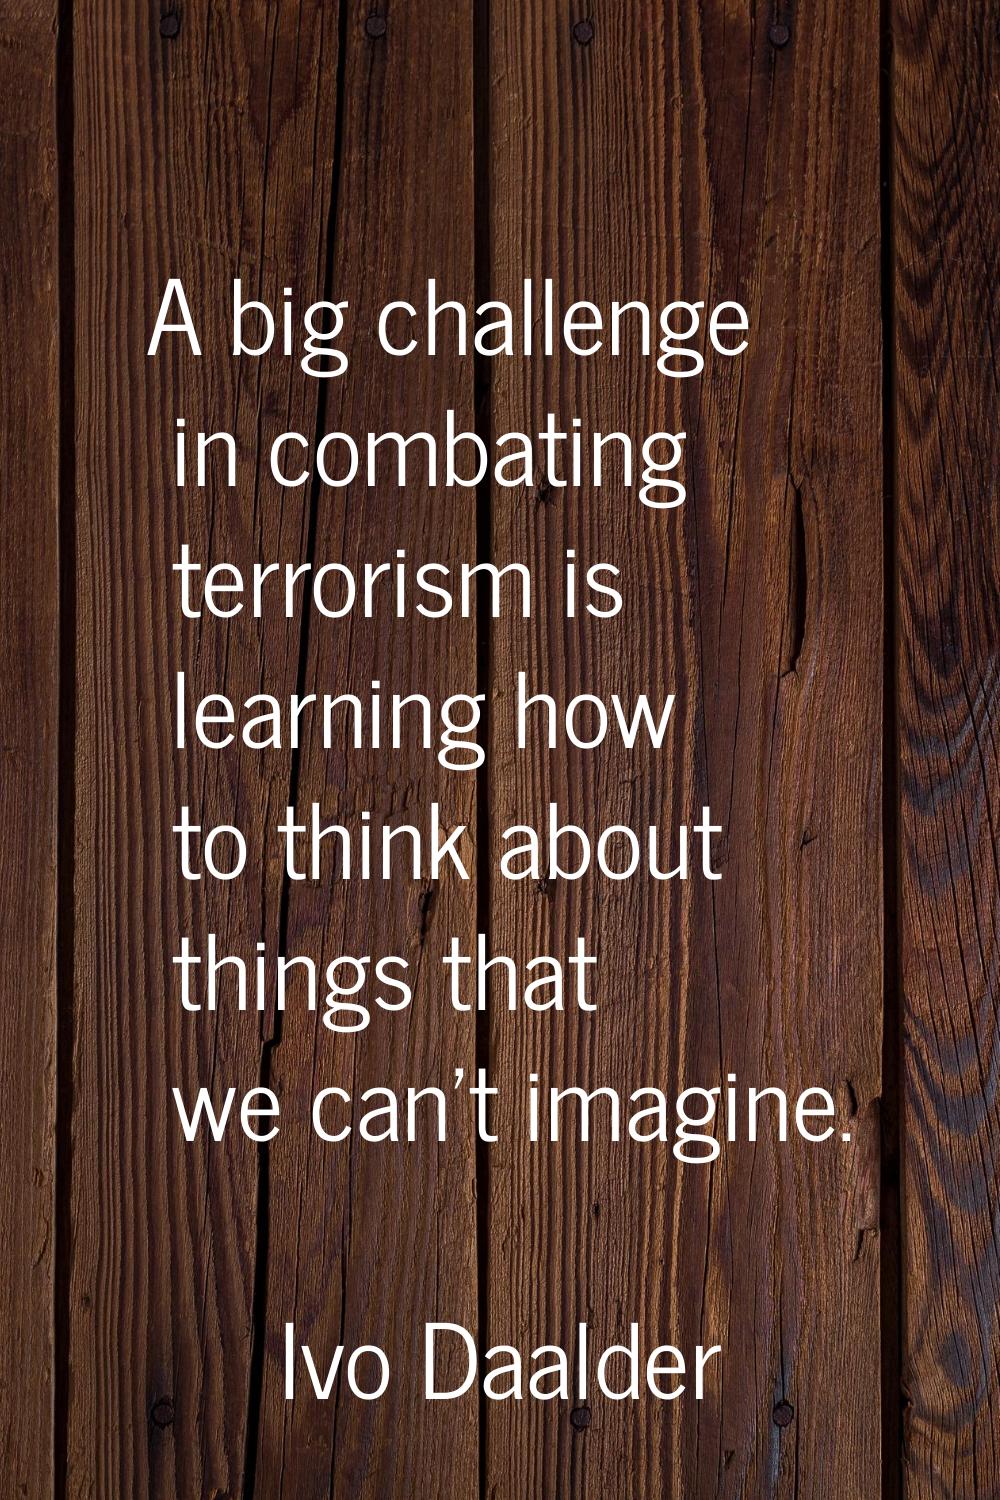 A big challenge in combating terrorism is learning how to think about things that we can't imagine.